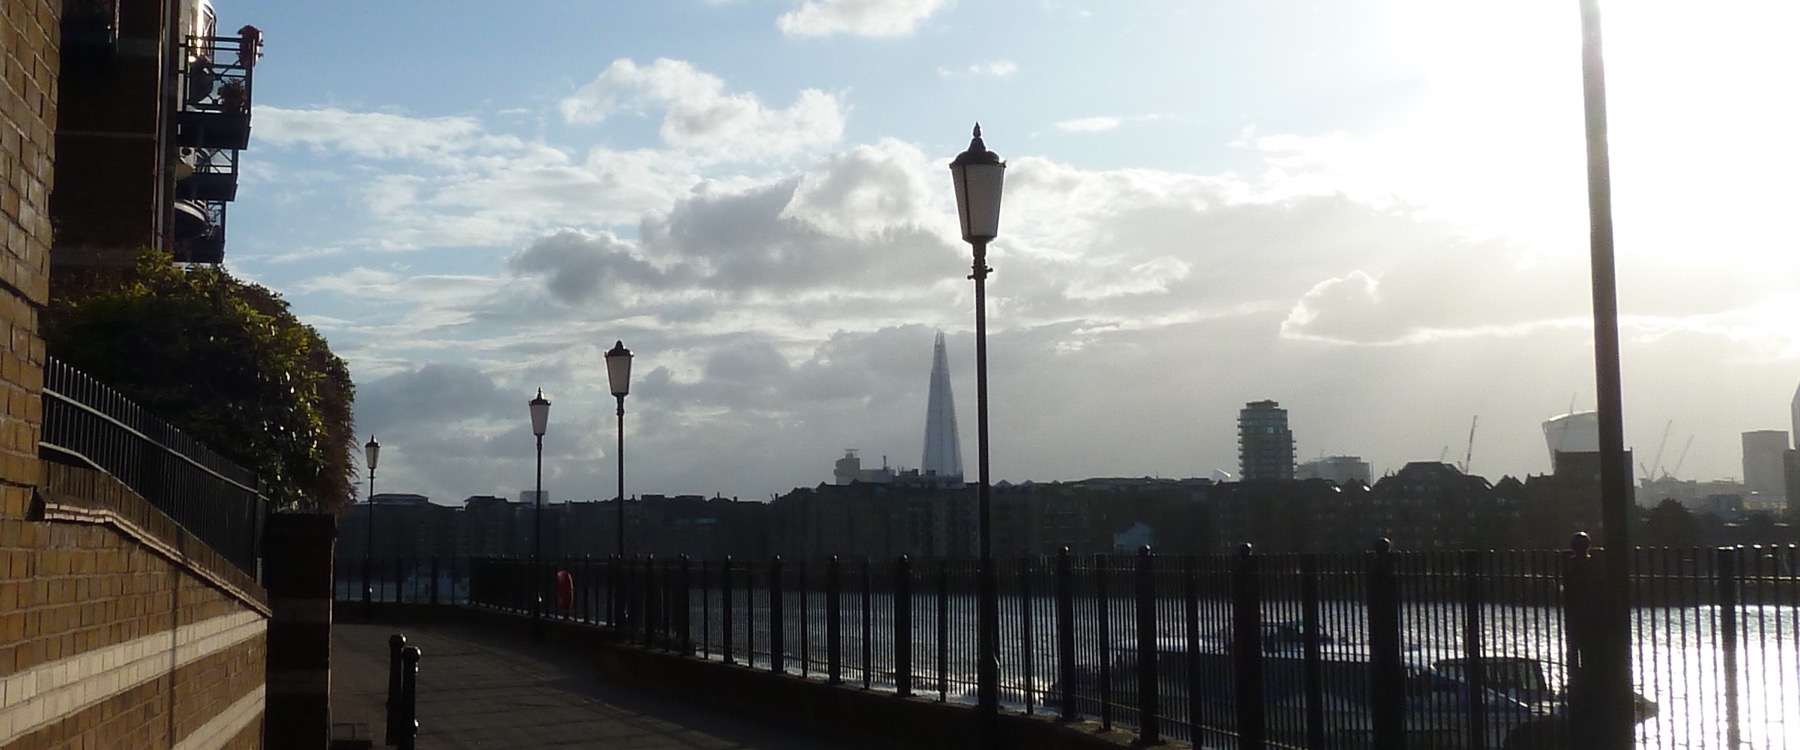 River view along the Thames, featuring the Shard